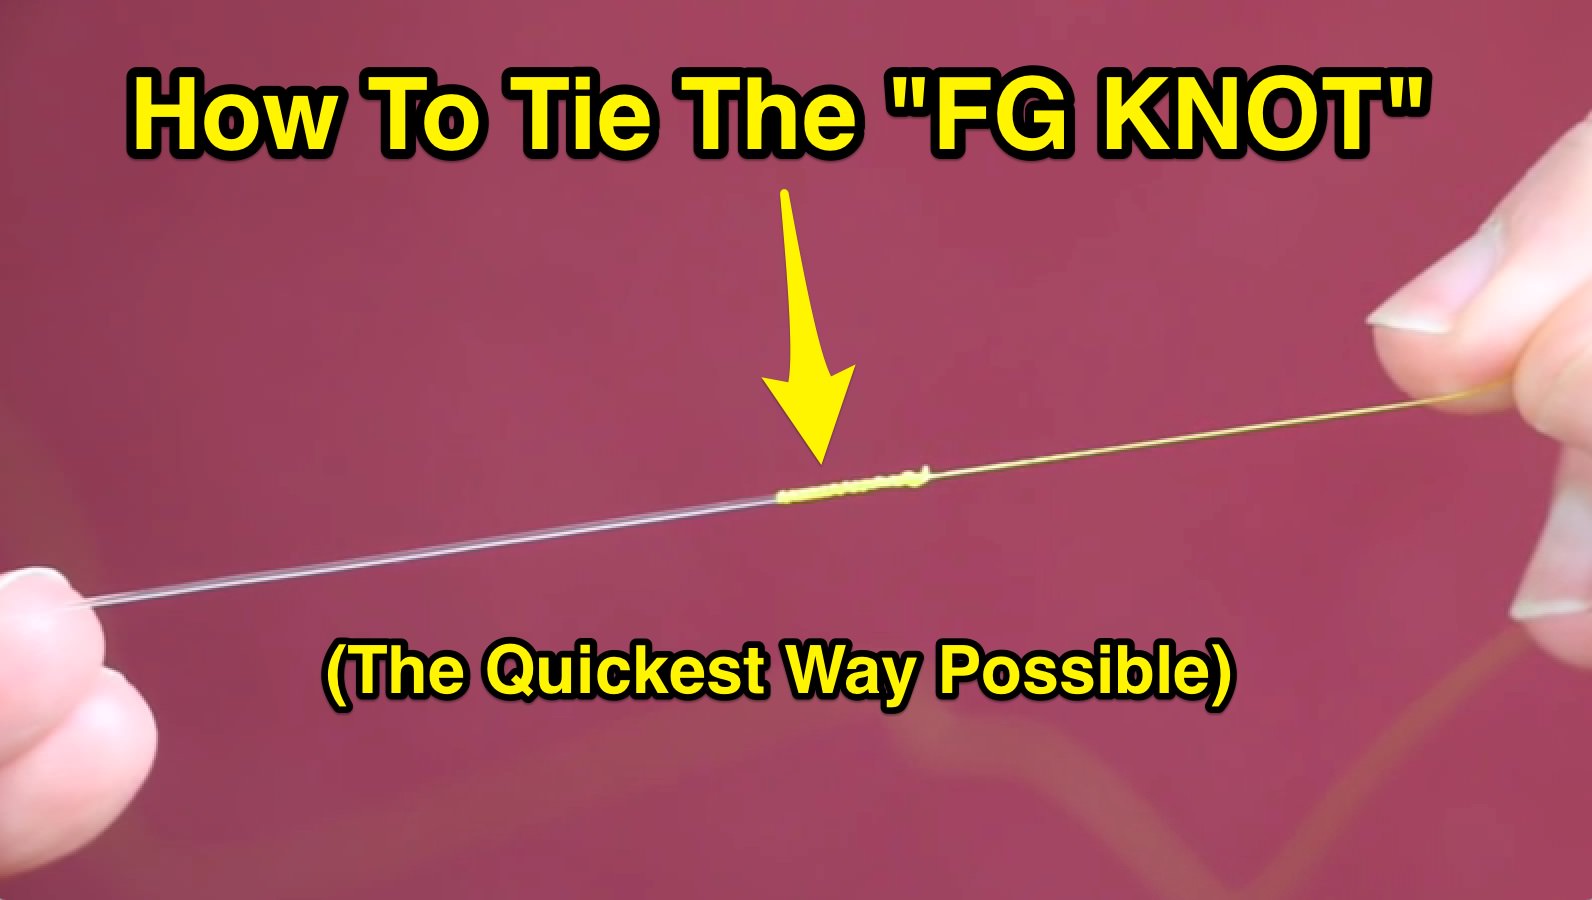 how to tie the FG knot